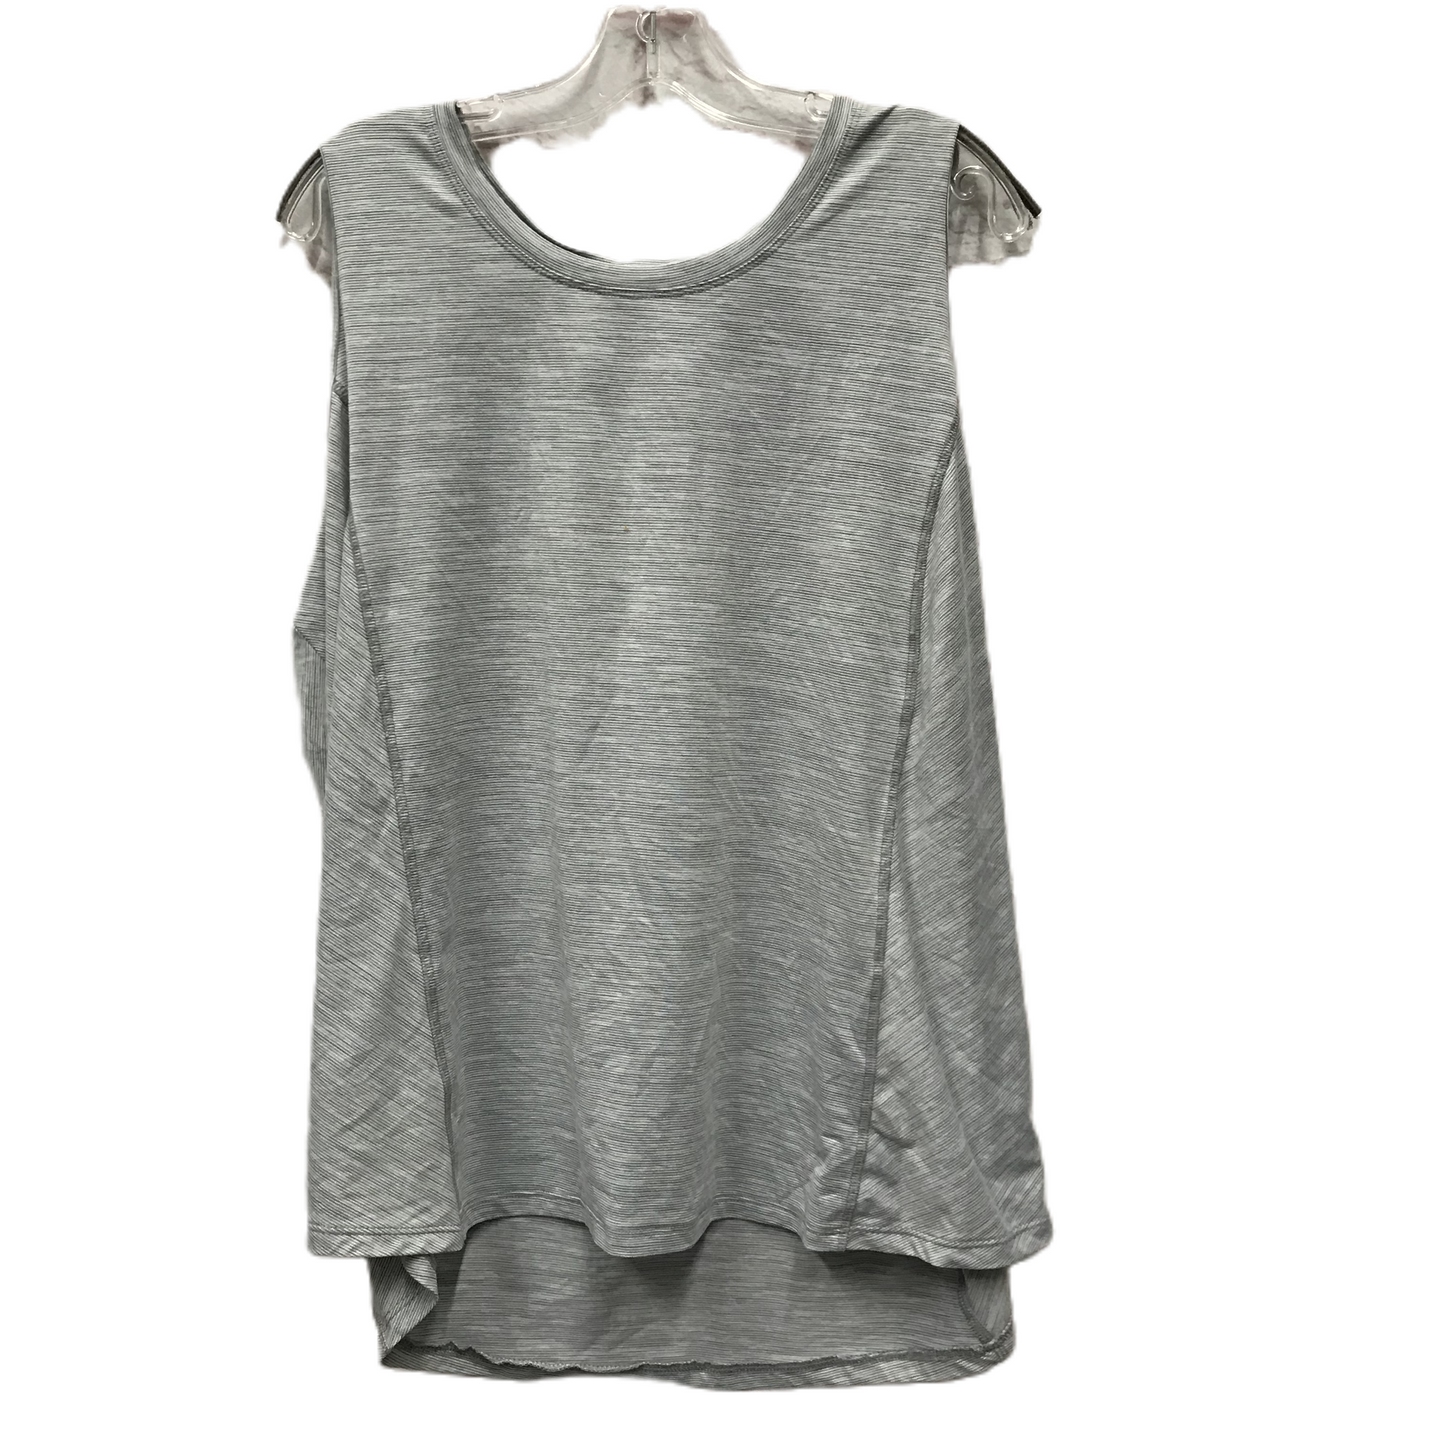 Grey Athletic Top Short Sleeve By Rbx, Size: 3x